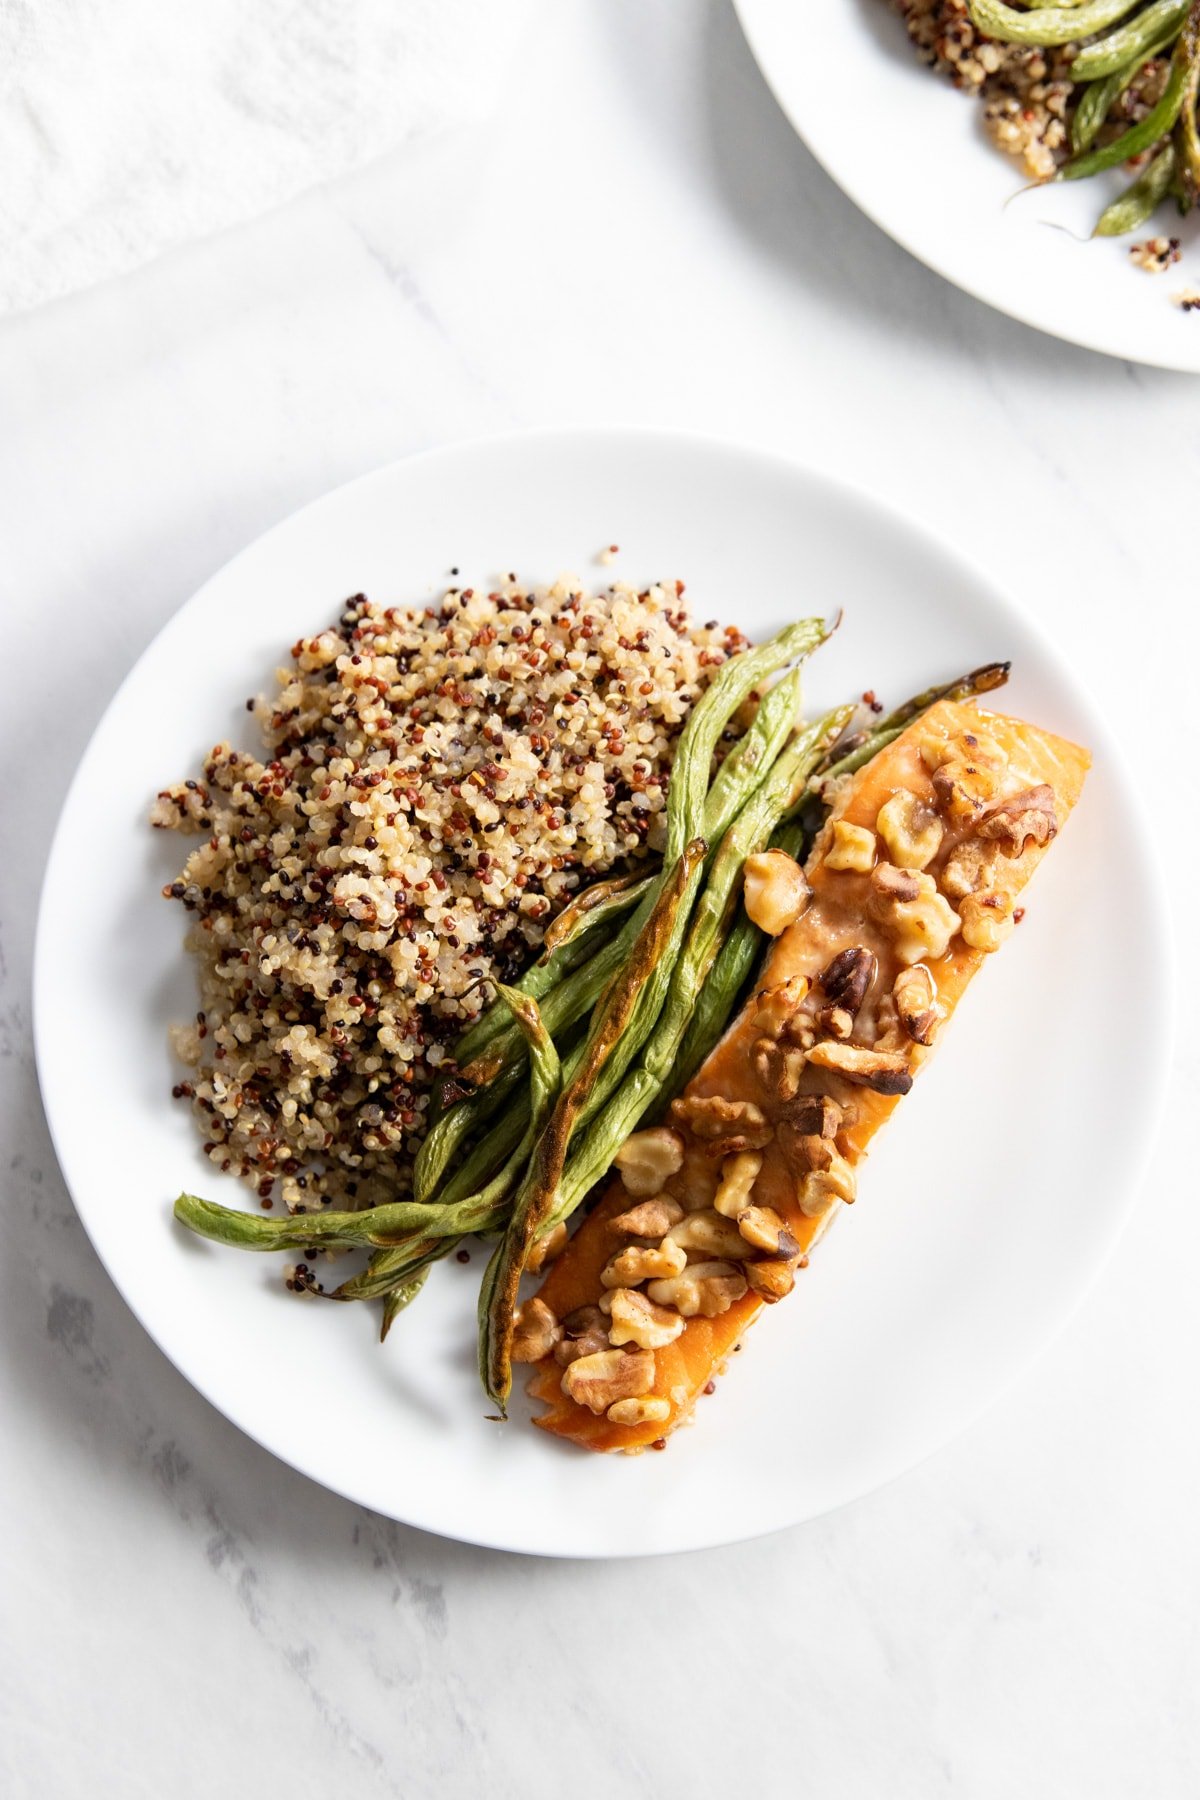 A plate containing walnut-topped salmon, roasted green beans, and cooked tri-color quinoa.